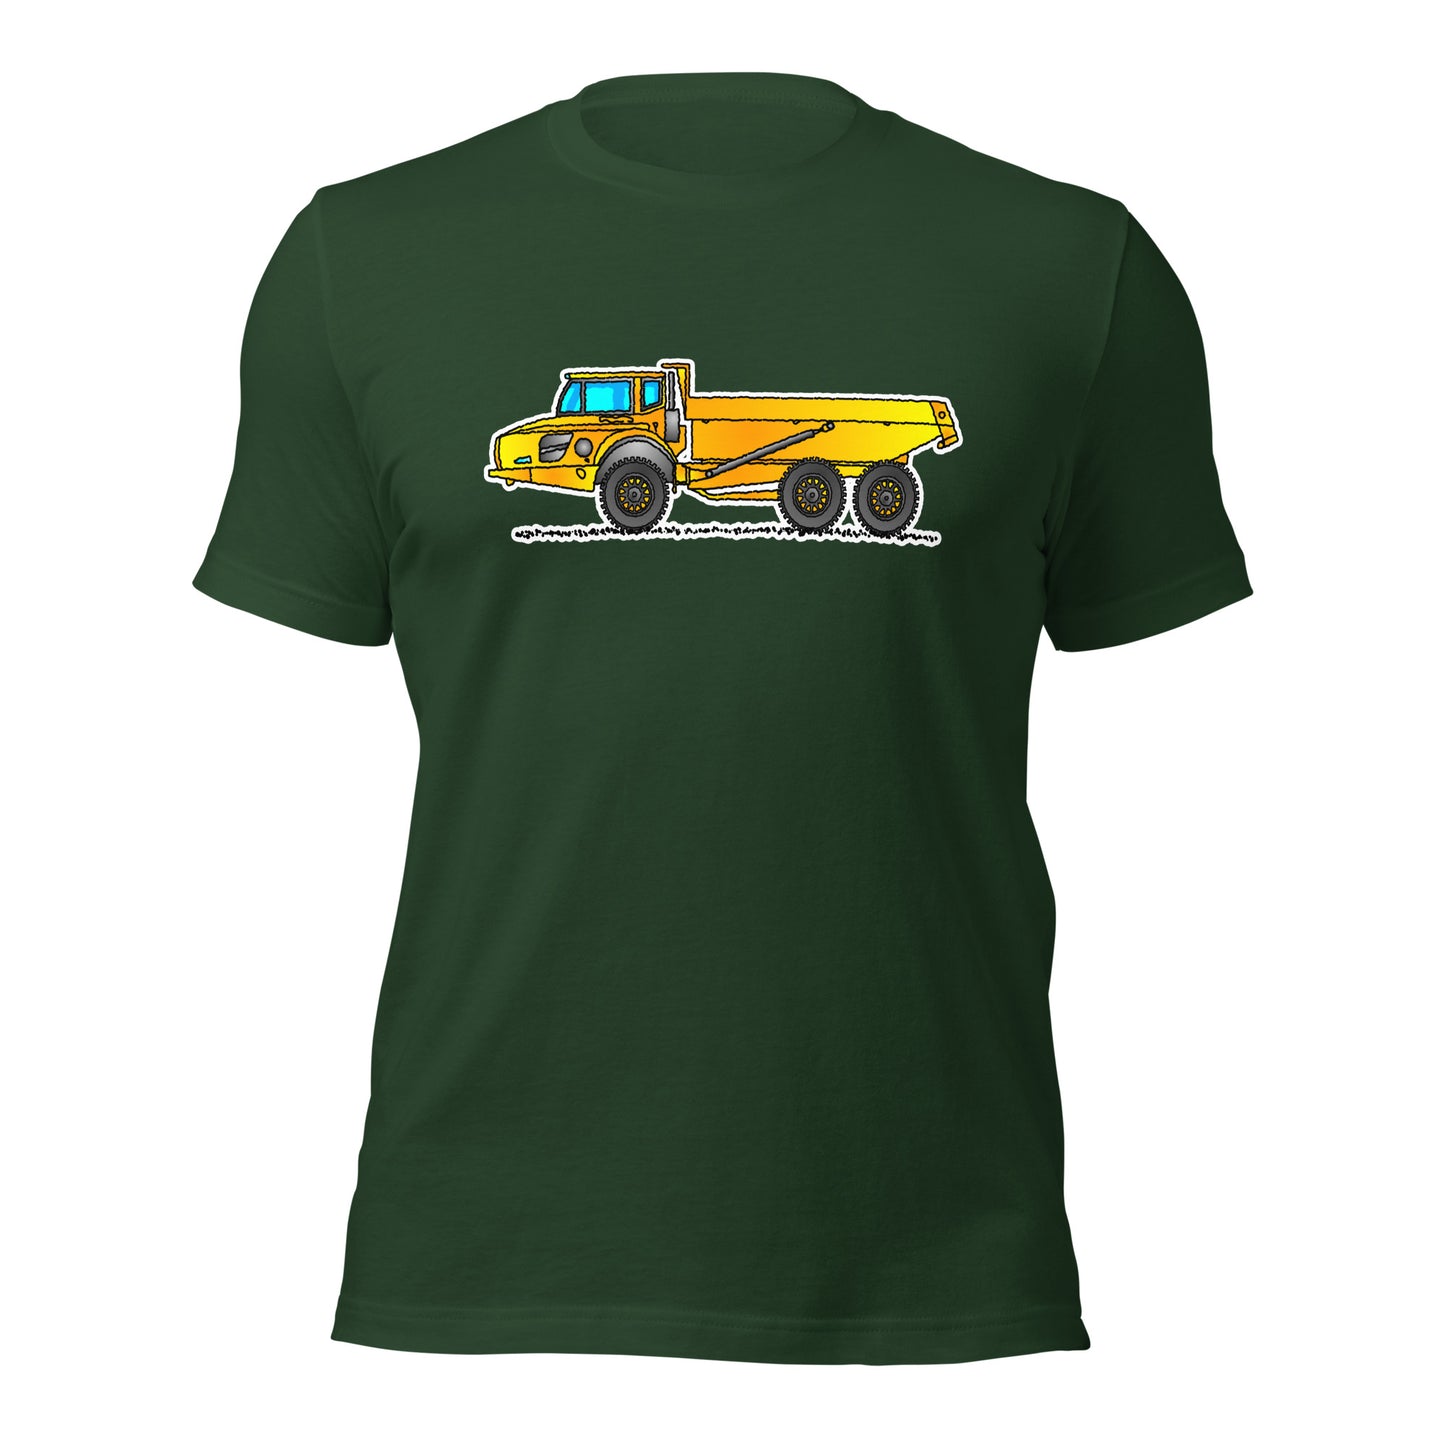 Articulated Loader T-Shirt, Adult AT012